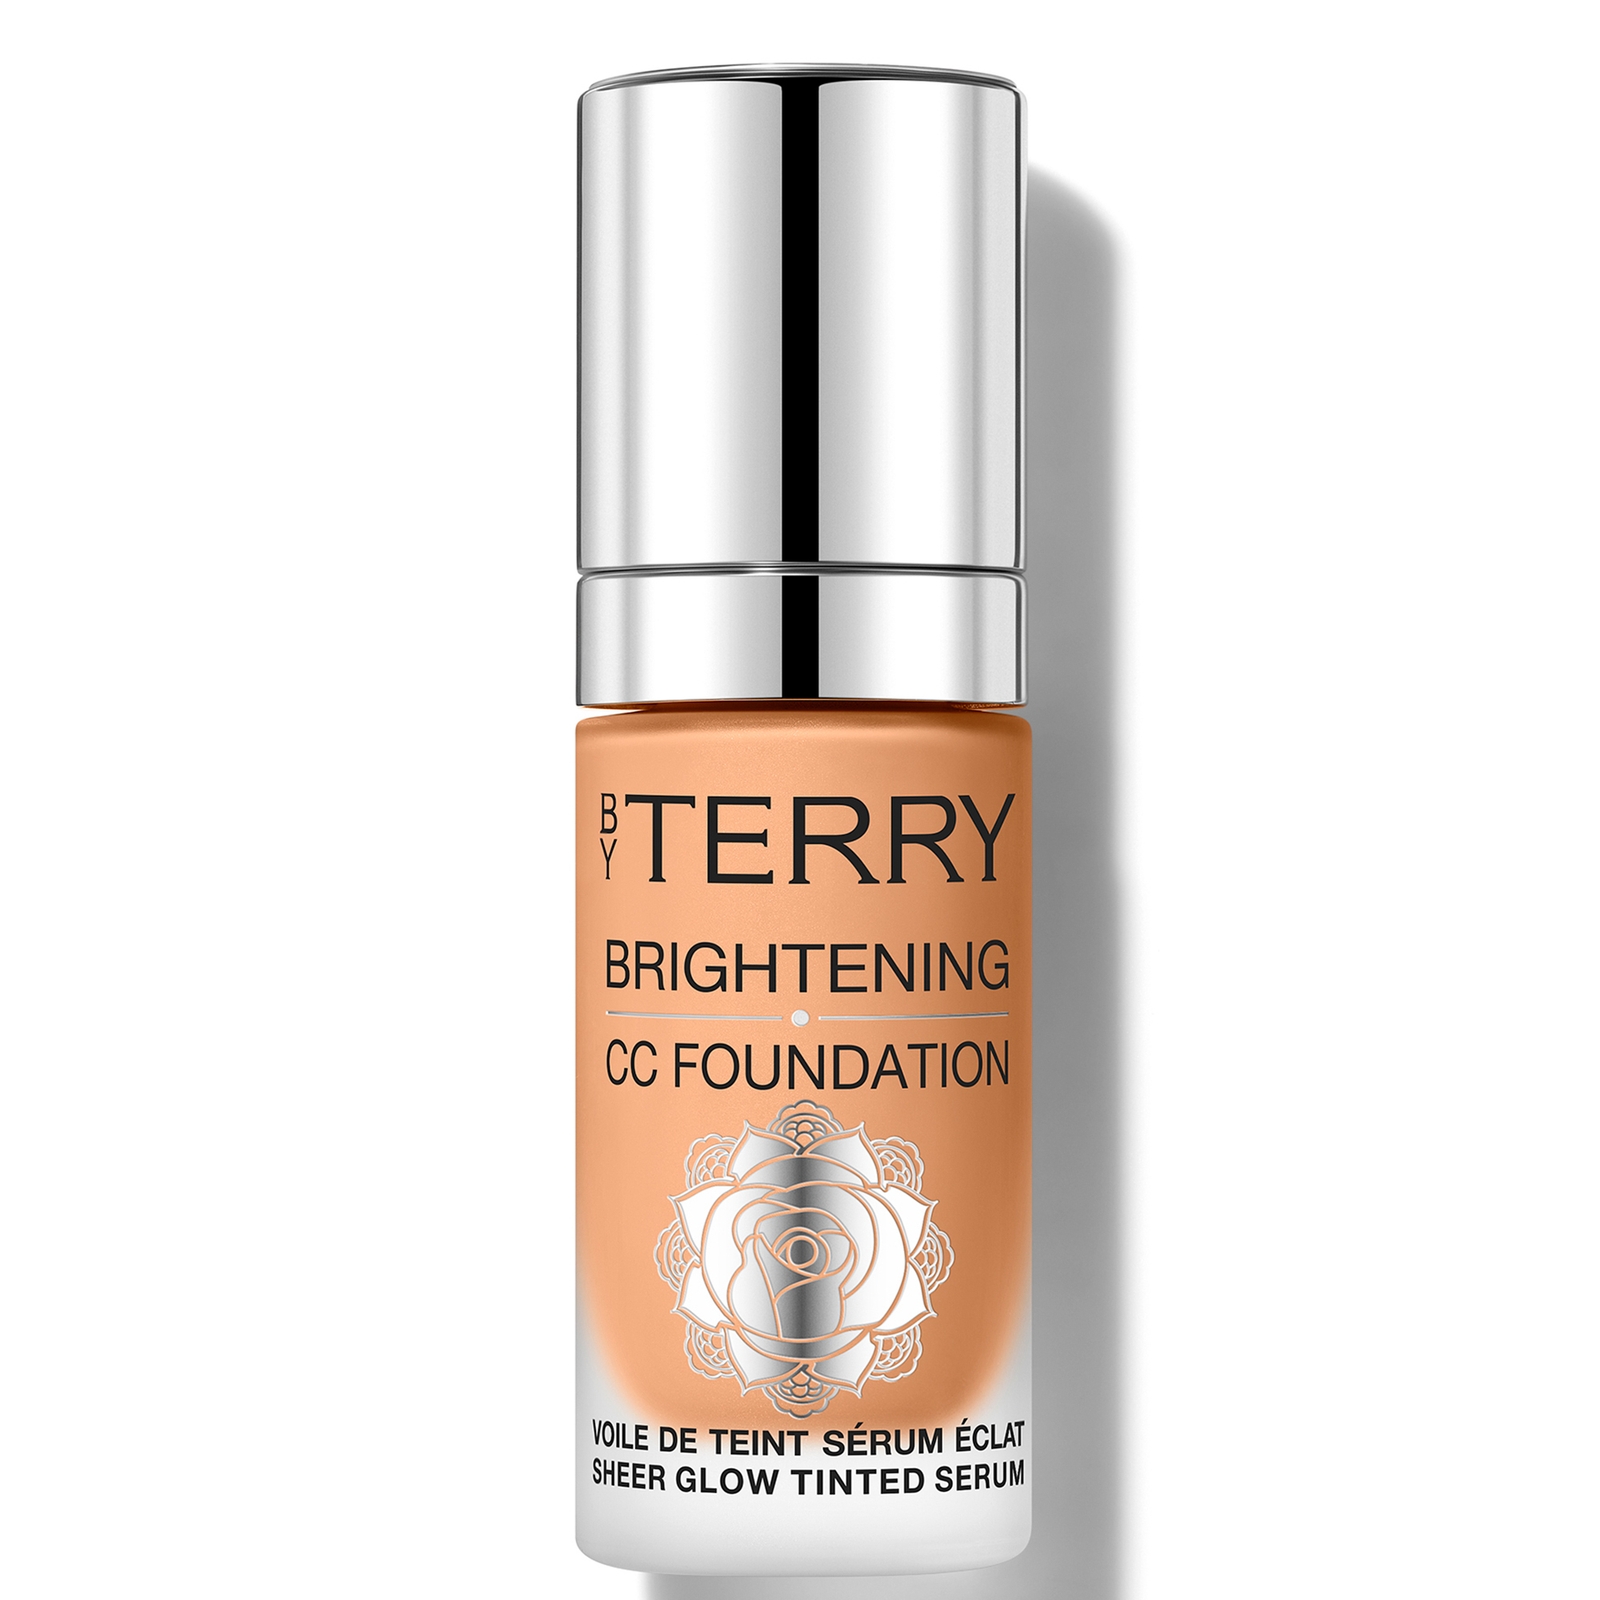 Image of By Terry Brightening CC Foundation 30ml (Various Shades) - 6C - TAN COOL